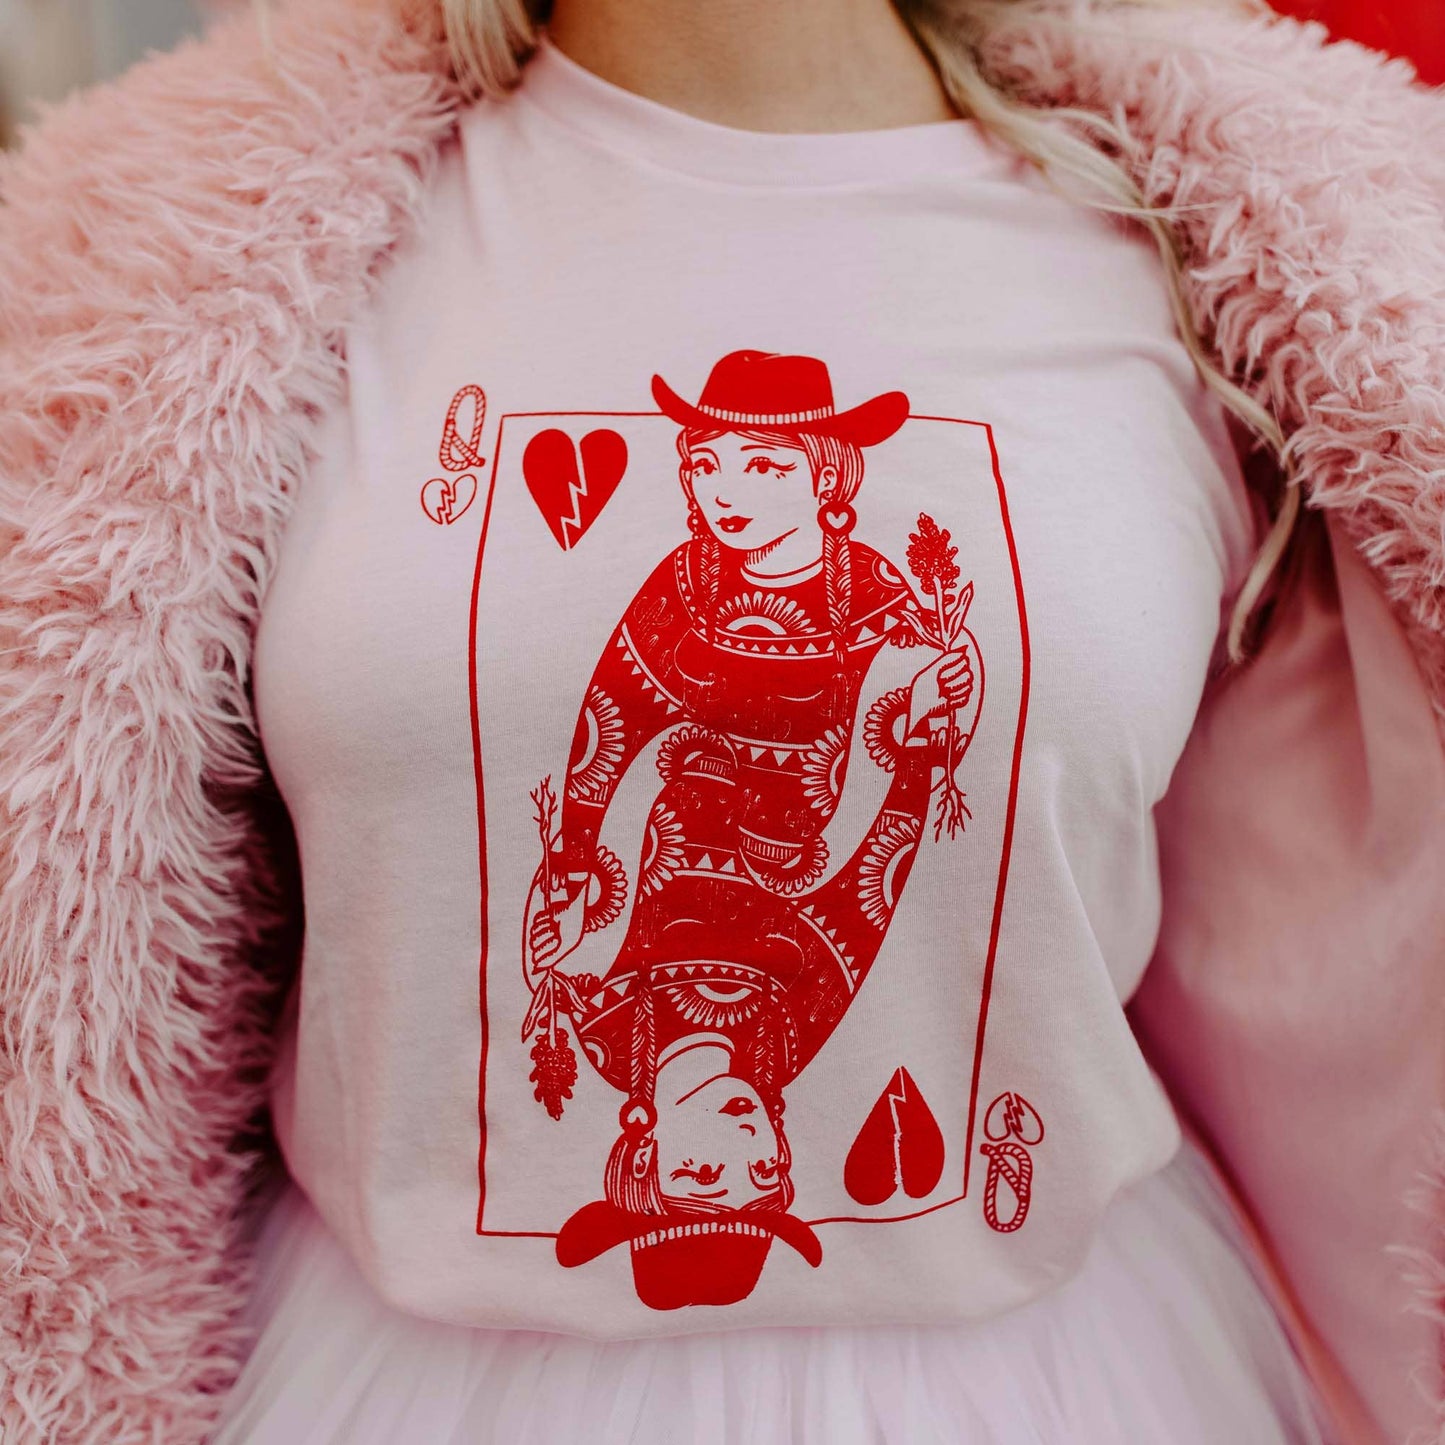 Queen of Hearts Pink Shirt, Valentine's Shirt - Whimsical Details